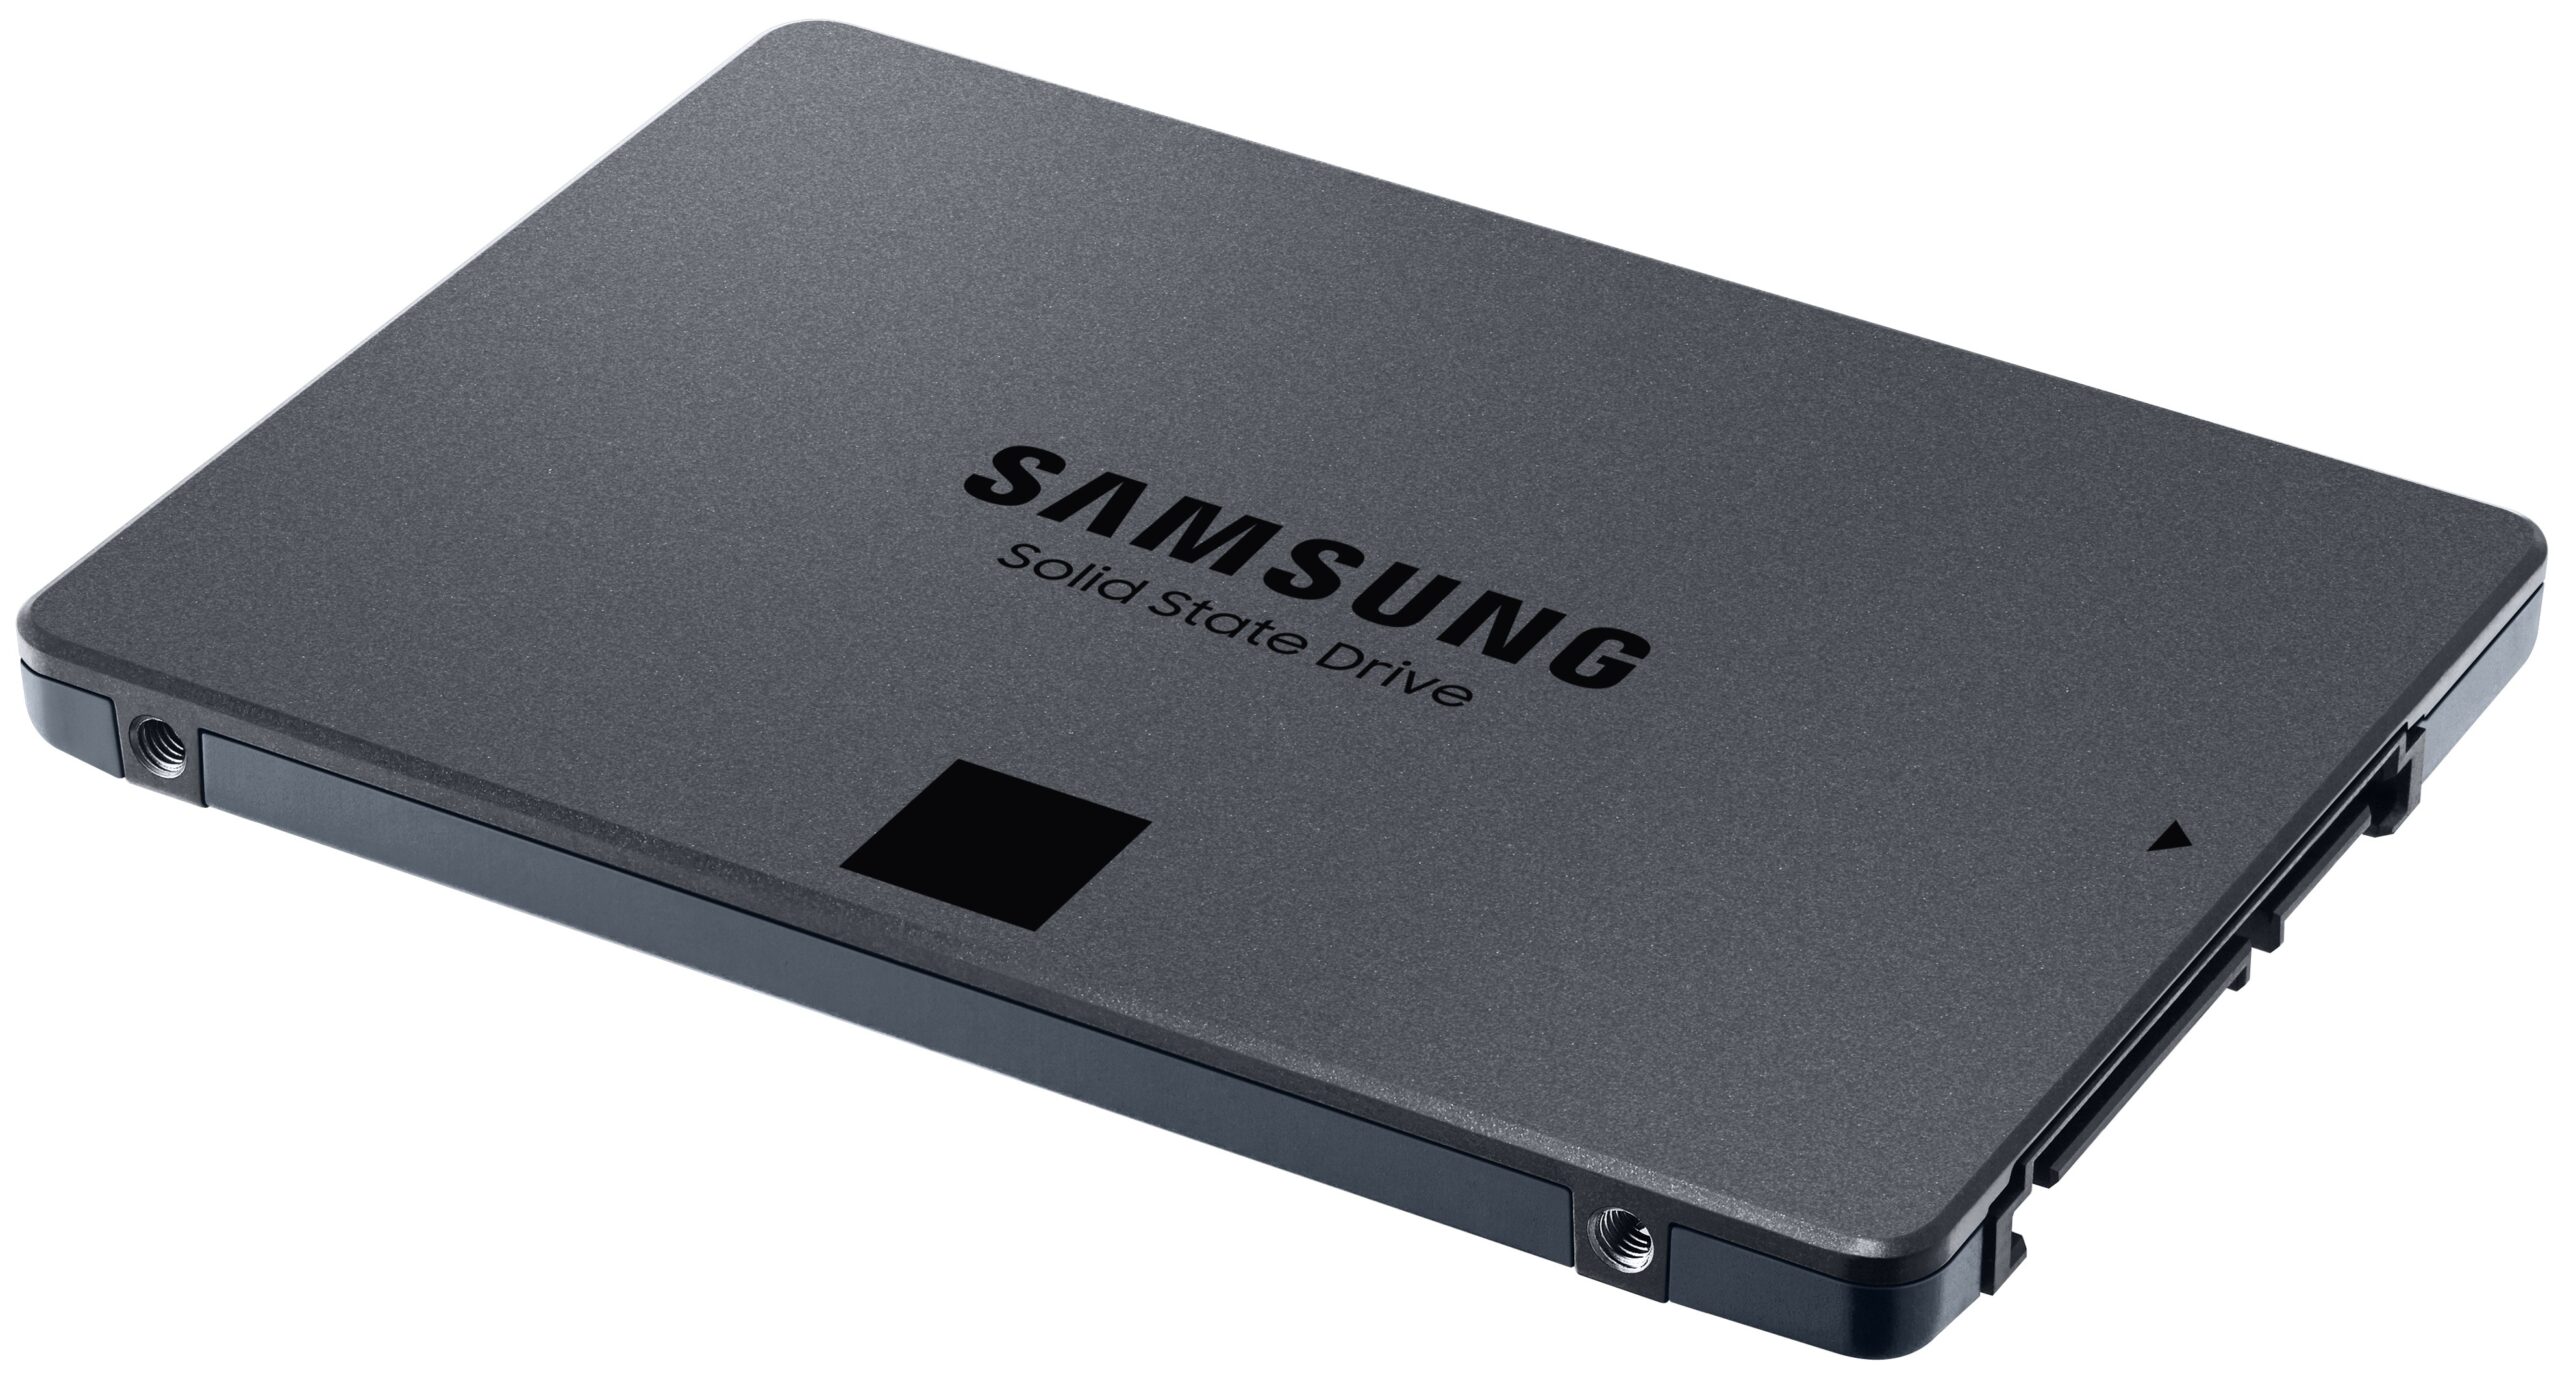 Samsung releases 870 QVO 2.5-inch SATA SSD with up to 8TB capacity